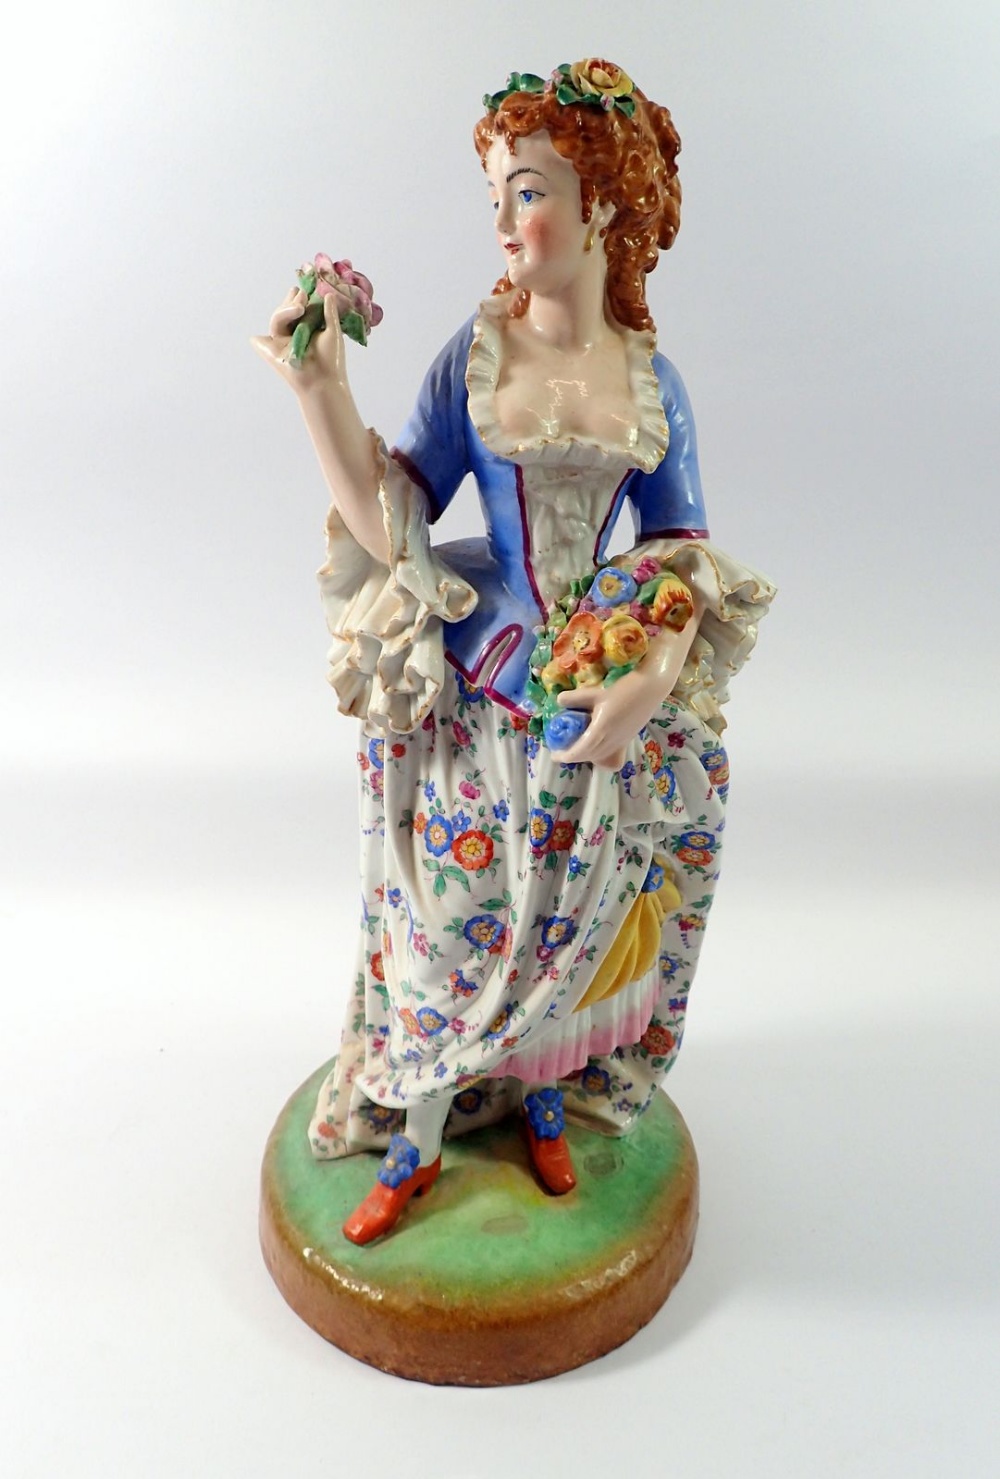 A 19th century French porcelain large figure of a woman with flowers, 44cm tall